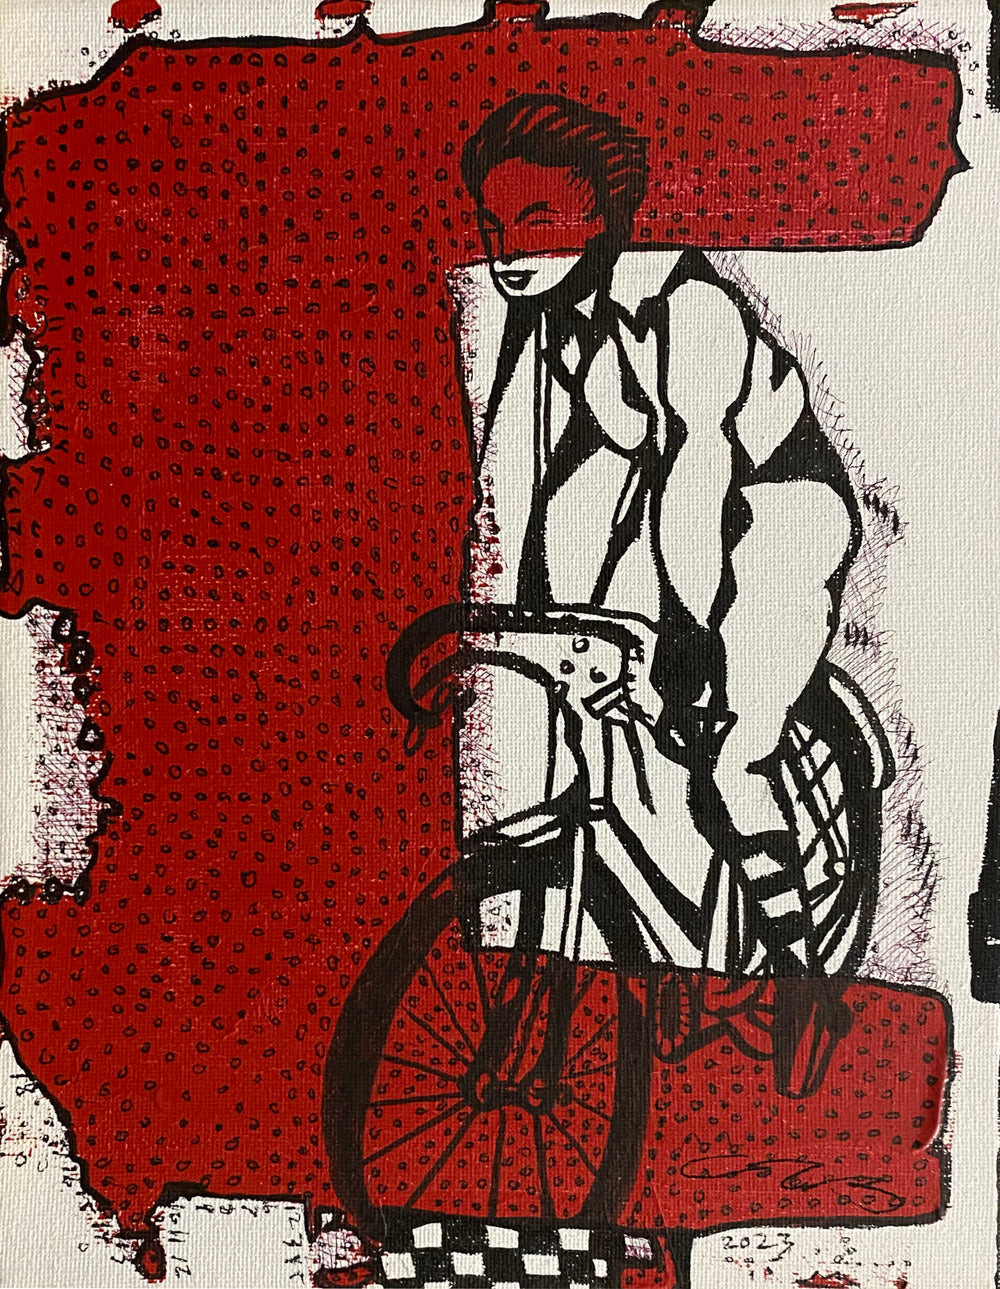 mixed media painting of a woman riding a bike